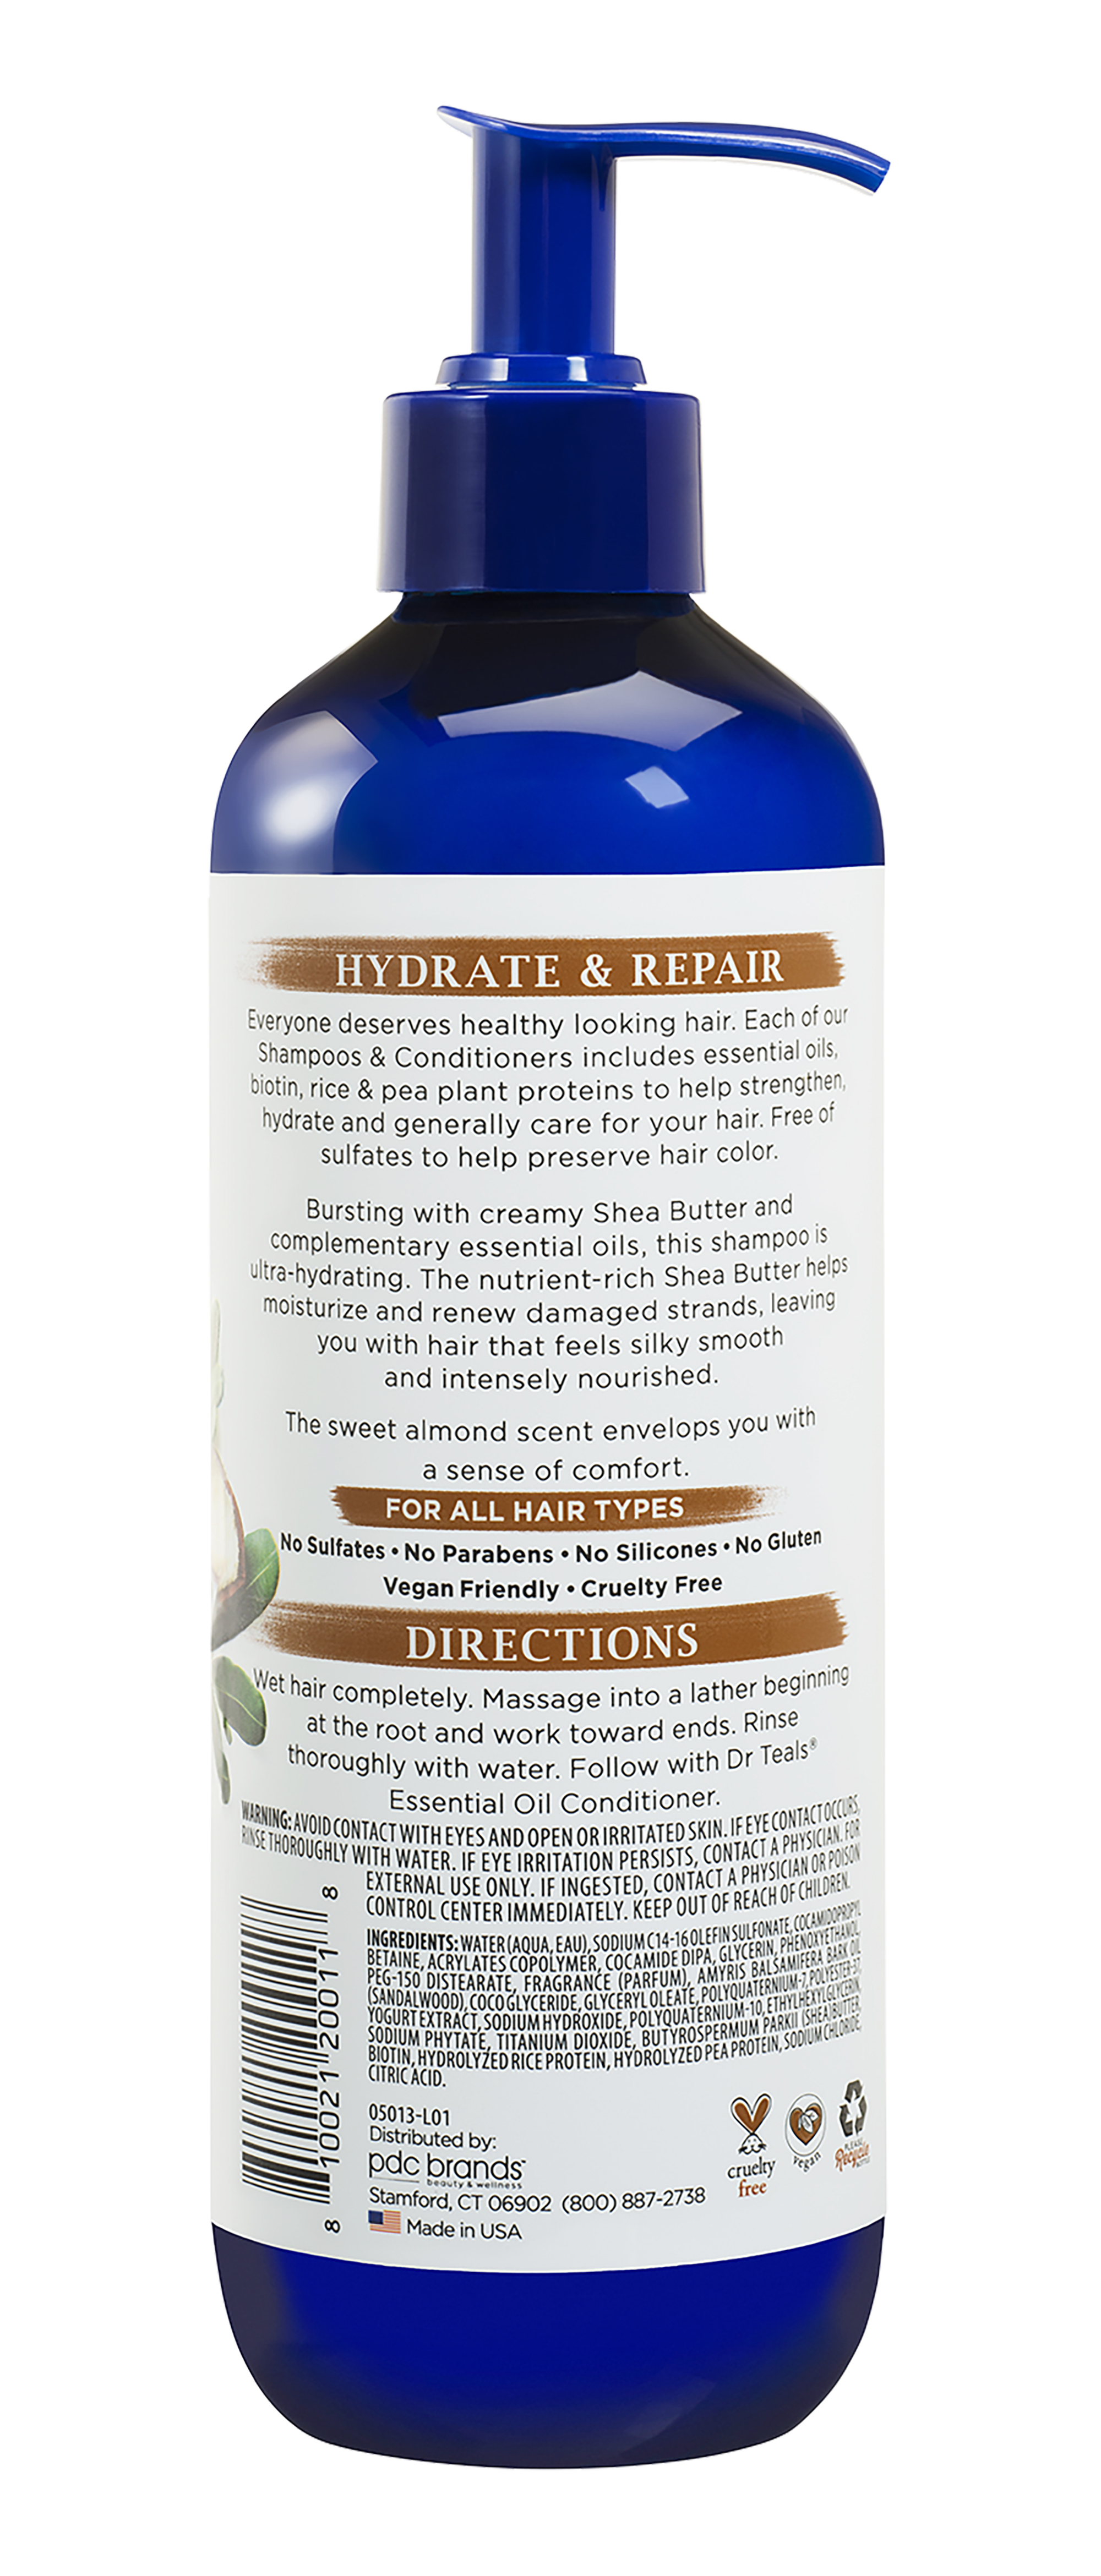 Dr Teal's Shea Butter Hydrate & Repair Essential Oil Shampoo, Sulfate Free, 16 oz. - image 3 of 7